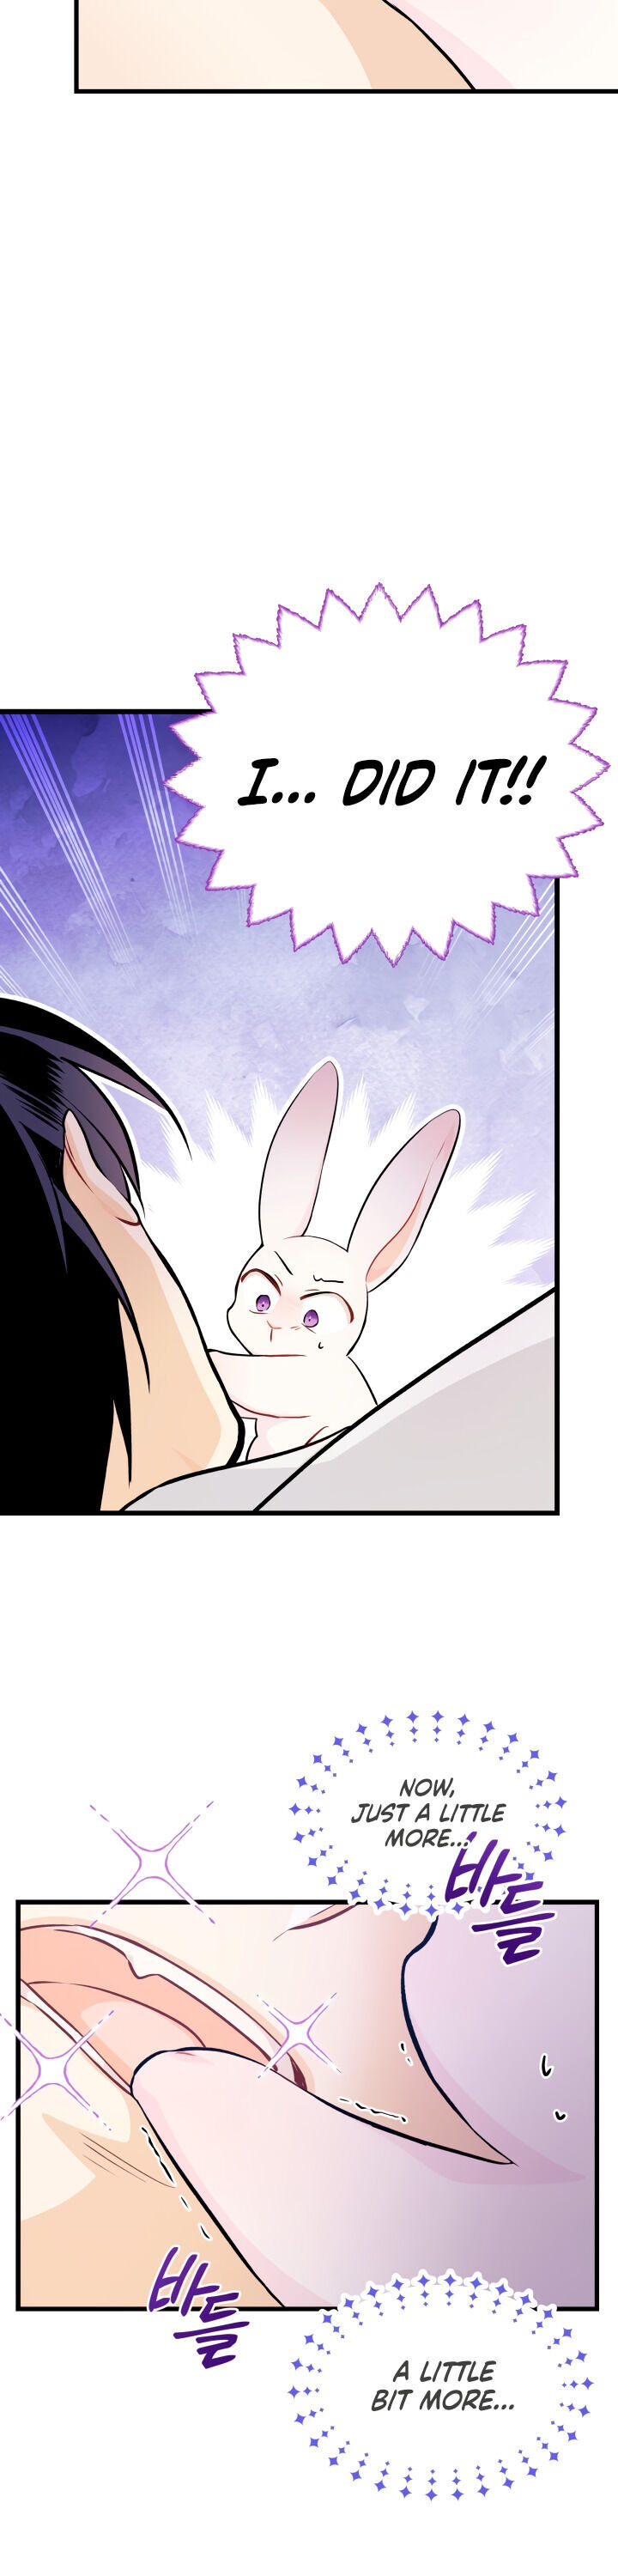 A Symbiotic Relationship Between A Rabbit And A Black Panther - Chapter 16 Page 16